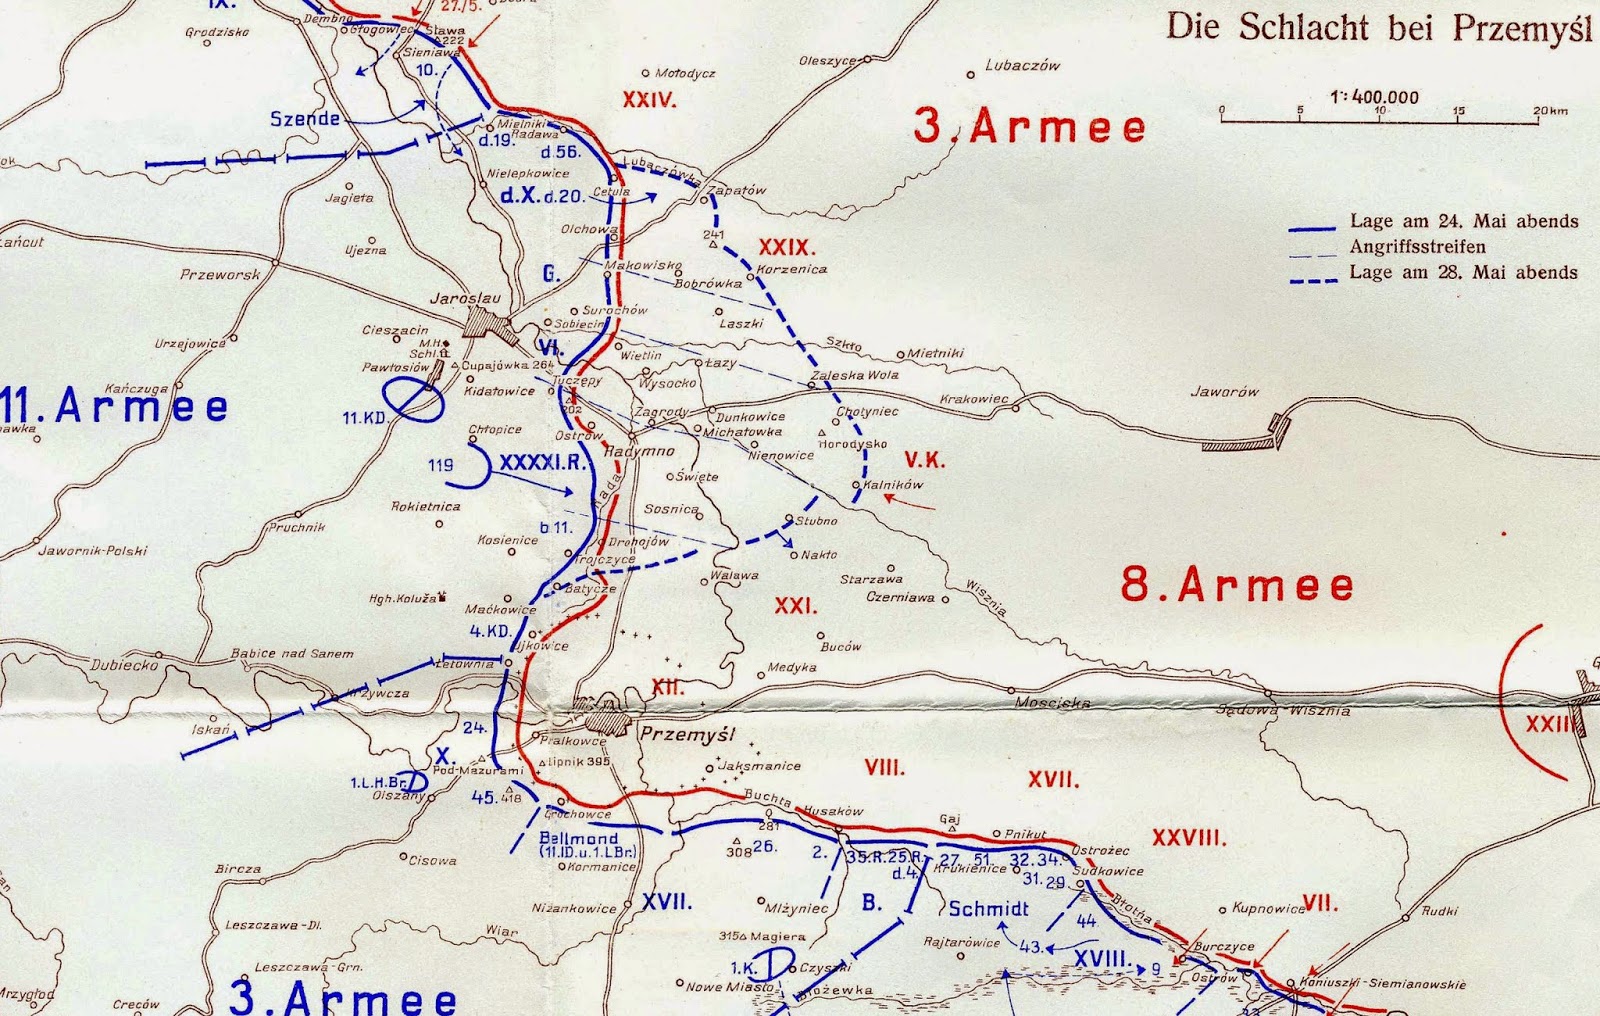 A Century On: A Diary of the Great War: May 24th, 1915